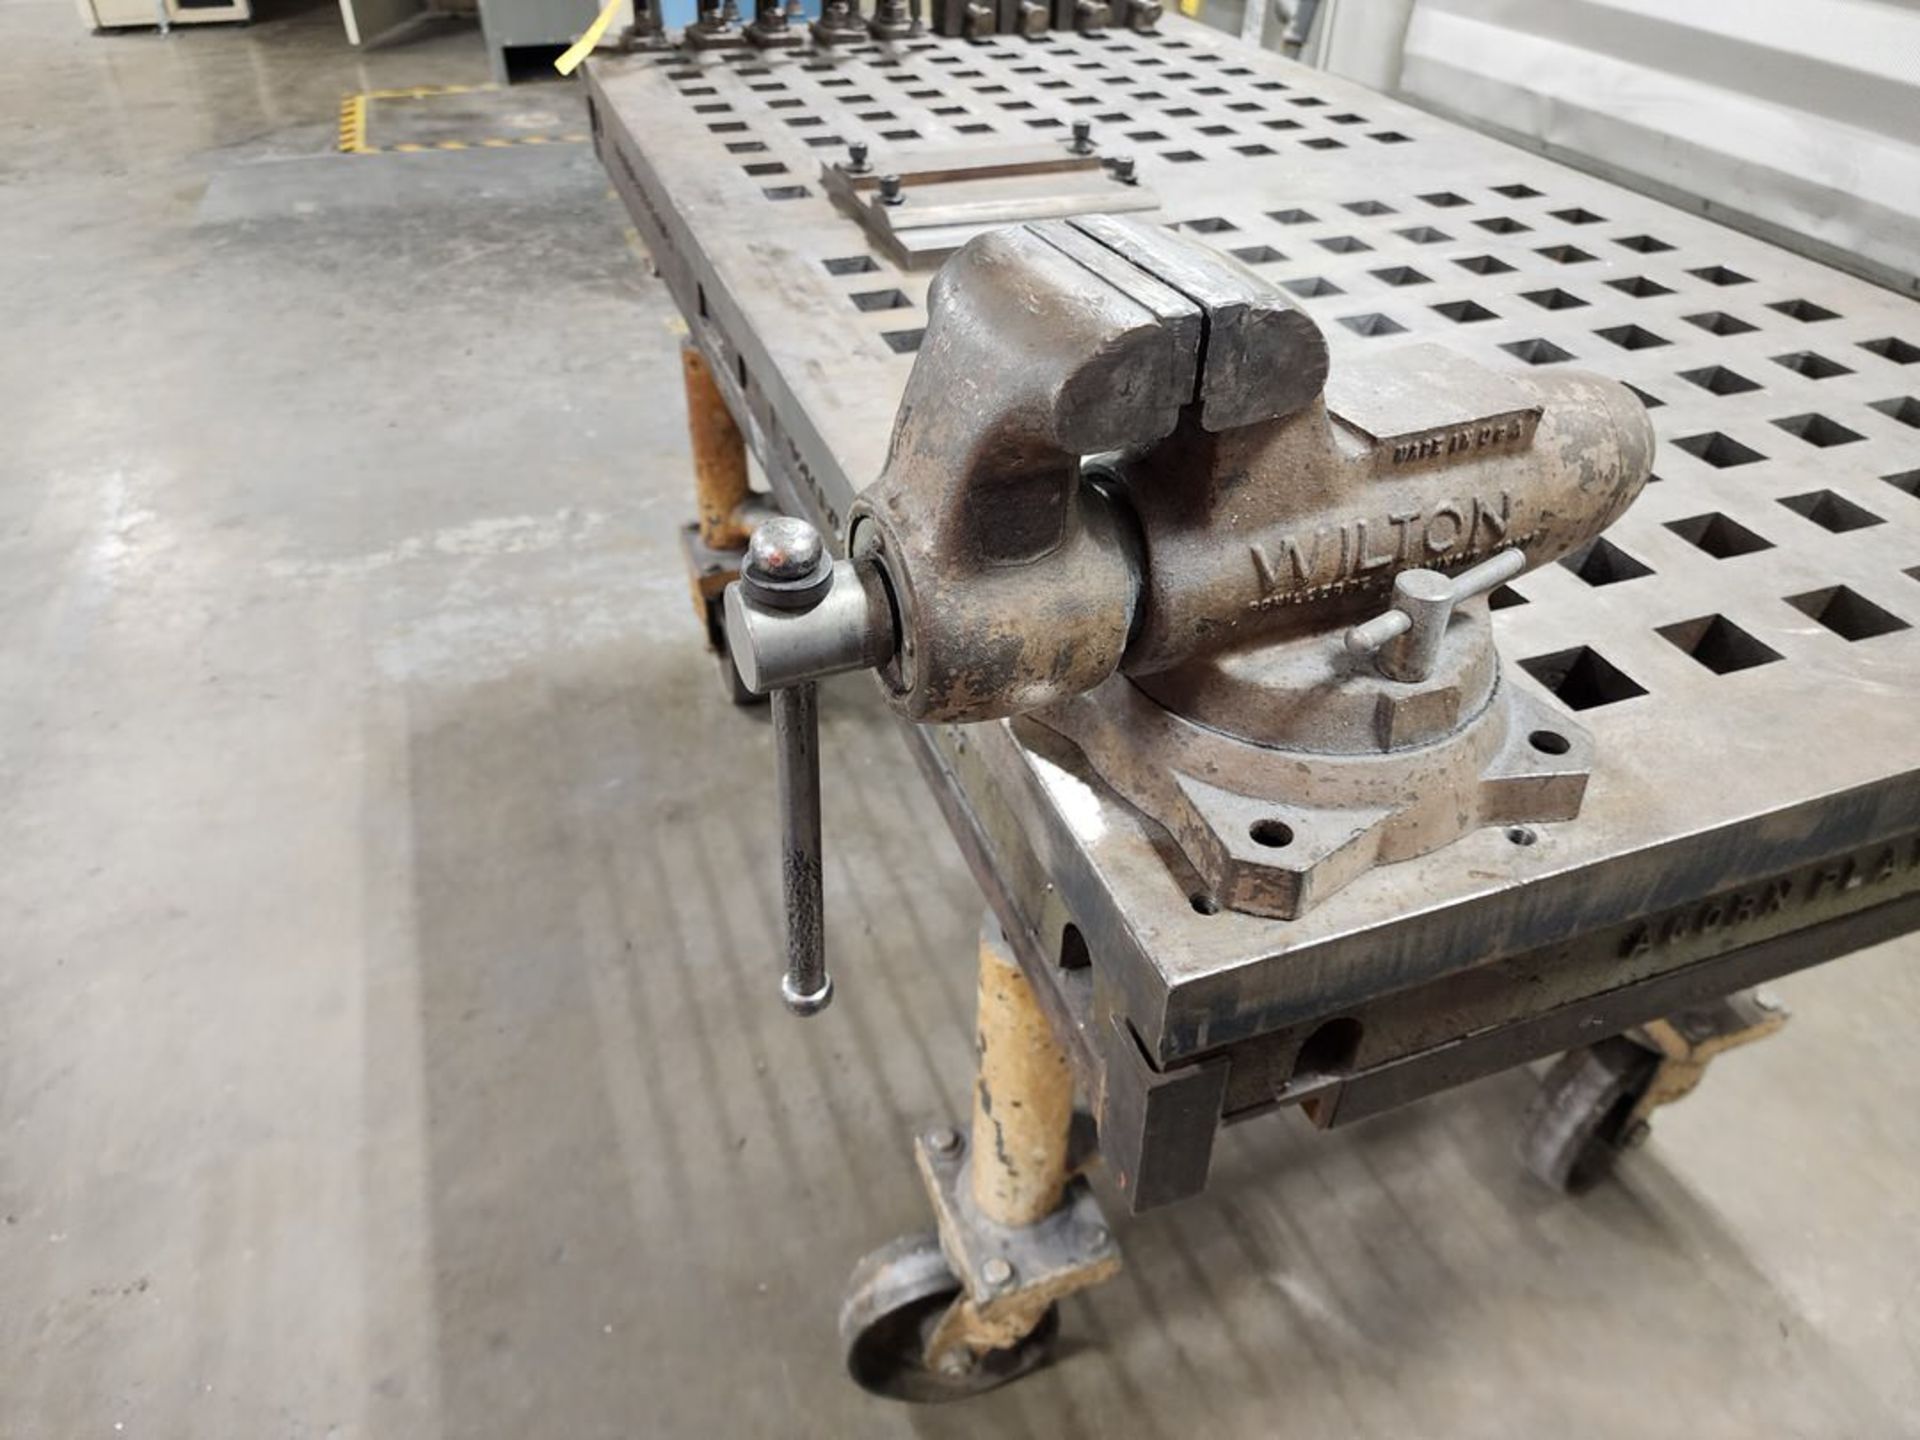 Welding Table 72" x 36" x 37"H; W/ 4" Wilton Vise & Assorted Clamps - Image 3 of 11